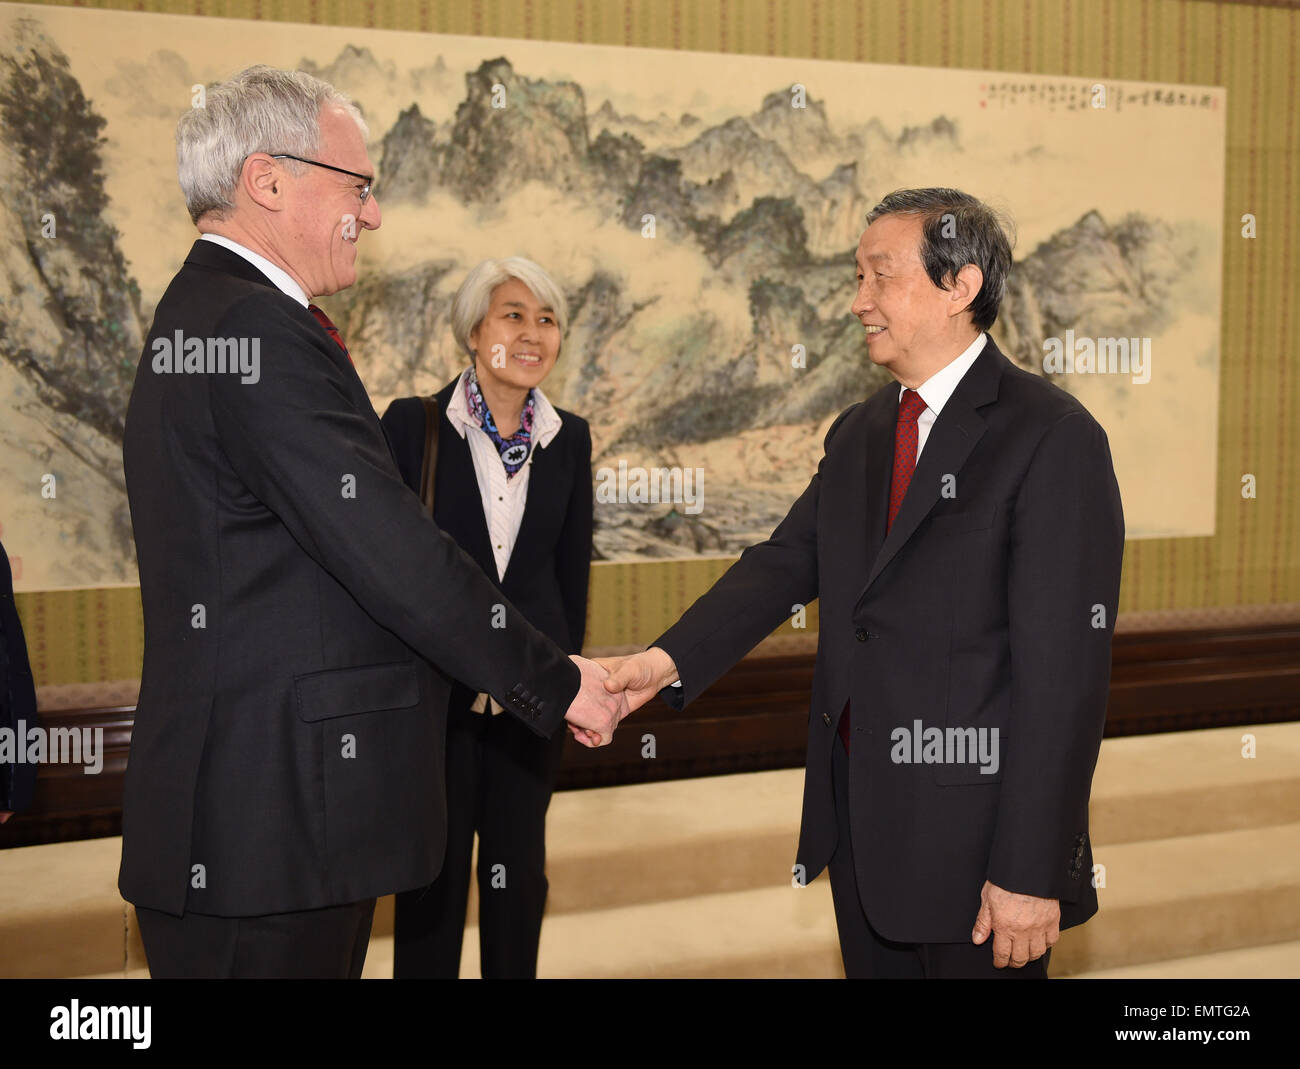 Beijing, China. 23rd Apr, 2015. Chinese Vice Premier Ma Kai (R) meets with Jean-Bernard Levy, CEO of France's electricity giant Electricite de France (EDF), in Beijing, capital of China, on April 23, 2015. © Gao Jie/Xinhua/Alamy Live News Stock Photo